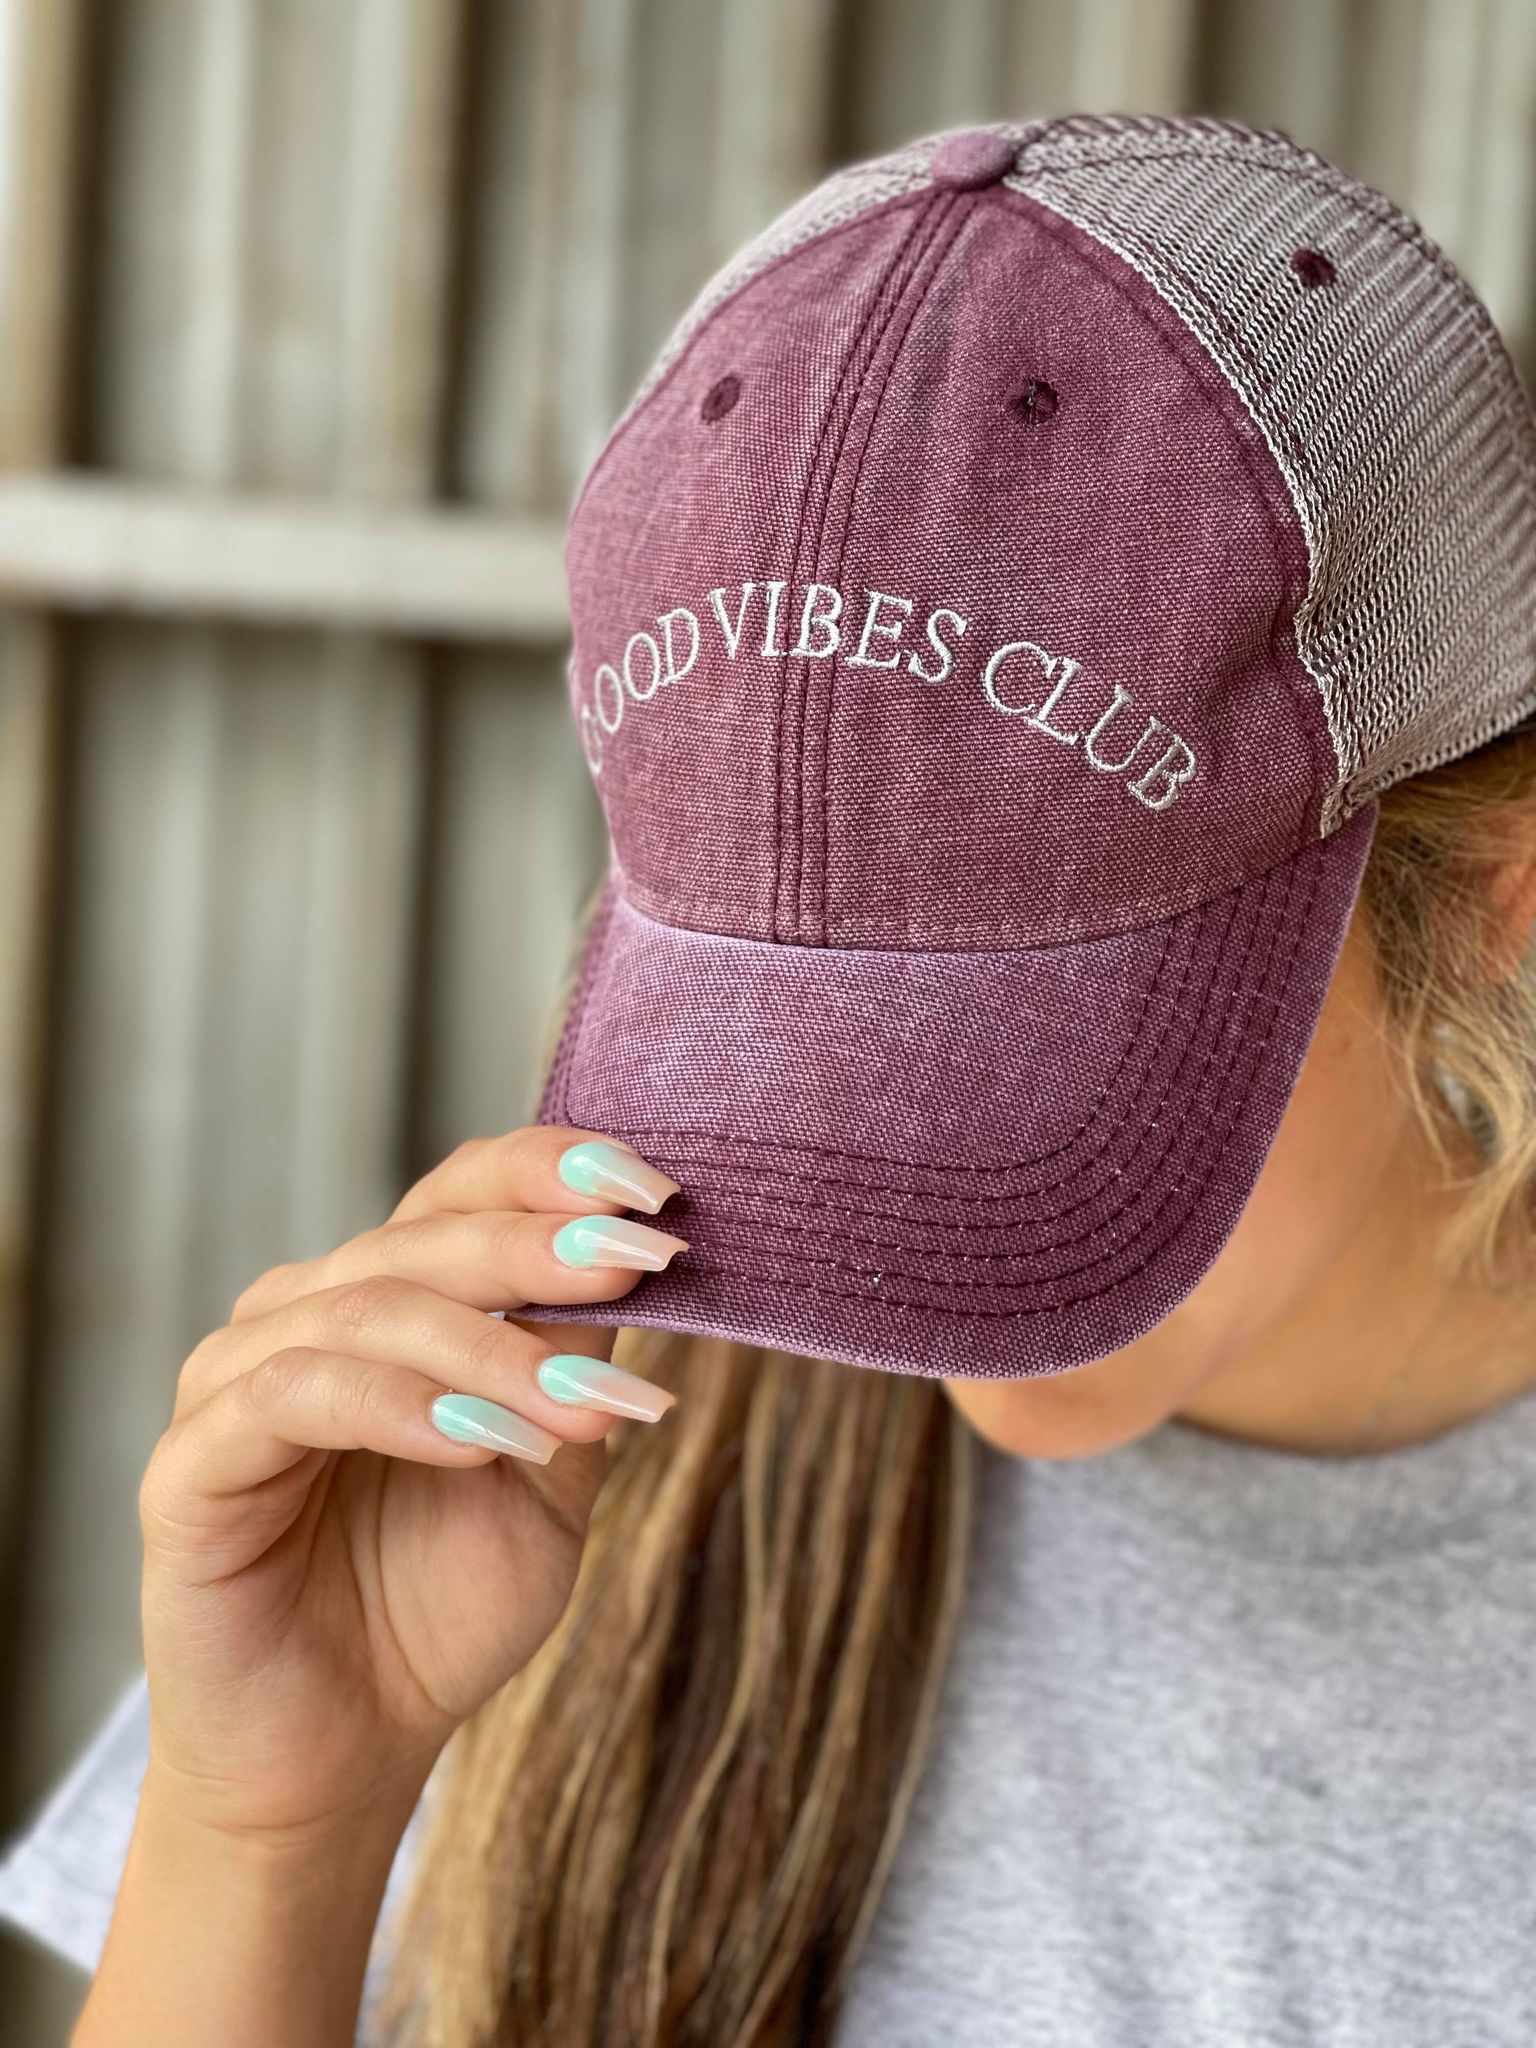 Good Vibes Club Hat-ask apparel wholesale